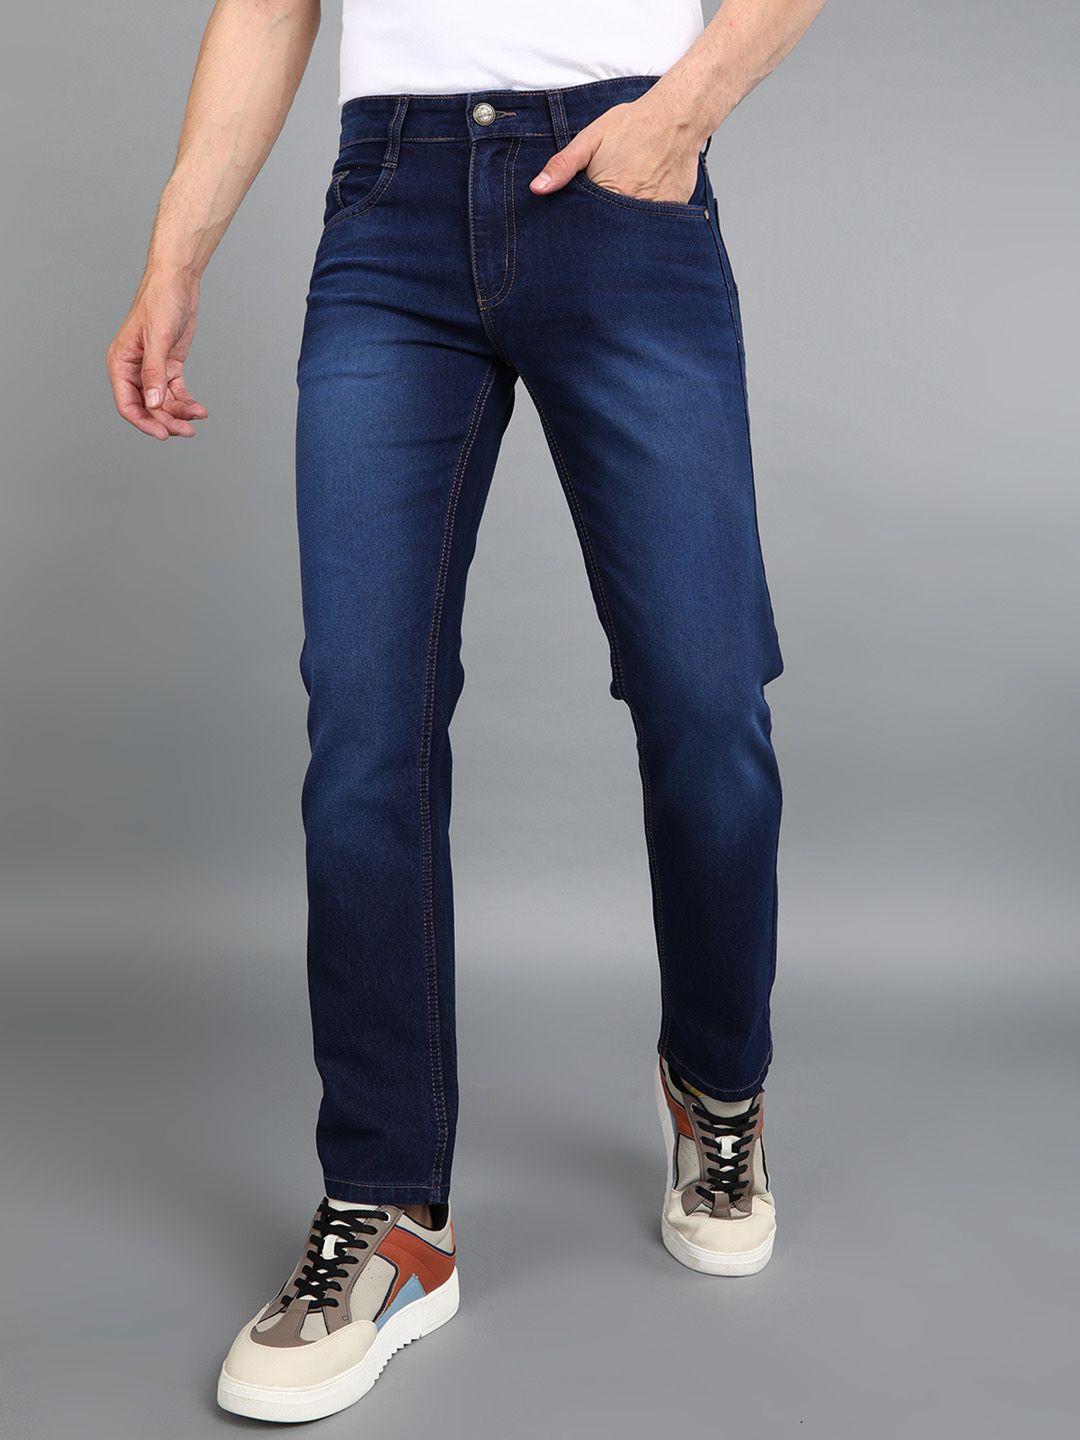 urbano-fashion-men-light-fade-clean-look-stretchable-jeans